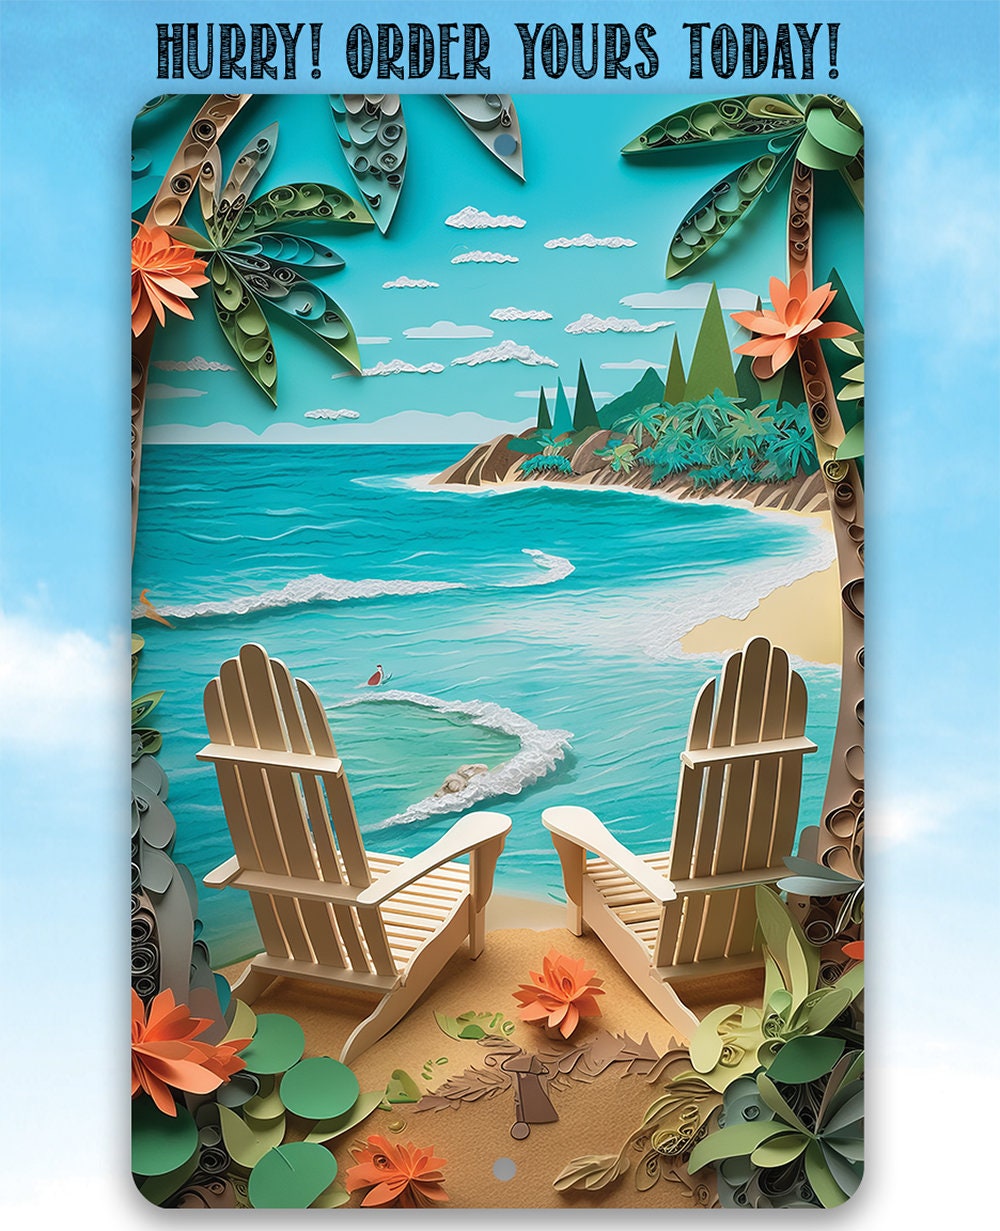 Tin - Beach Dreams - Great Beach and Nautical Decor - Durable Metal Sign - 8" x 12" or 12" x 18" Use Indoor/Outdoor -Great Housewarming Gift